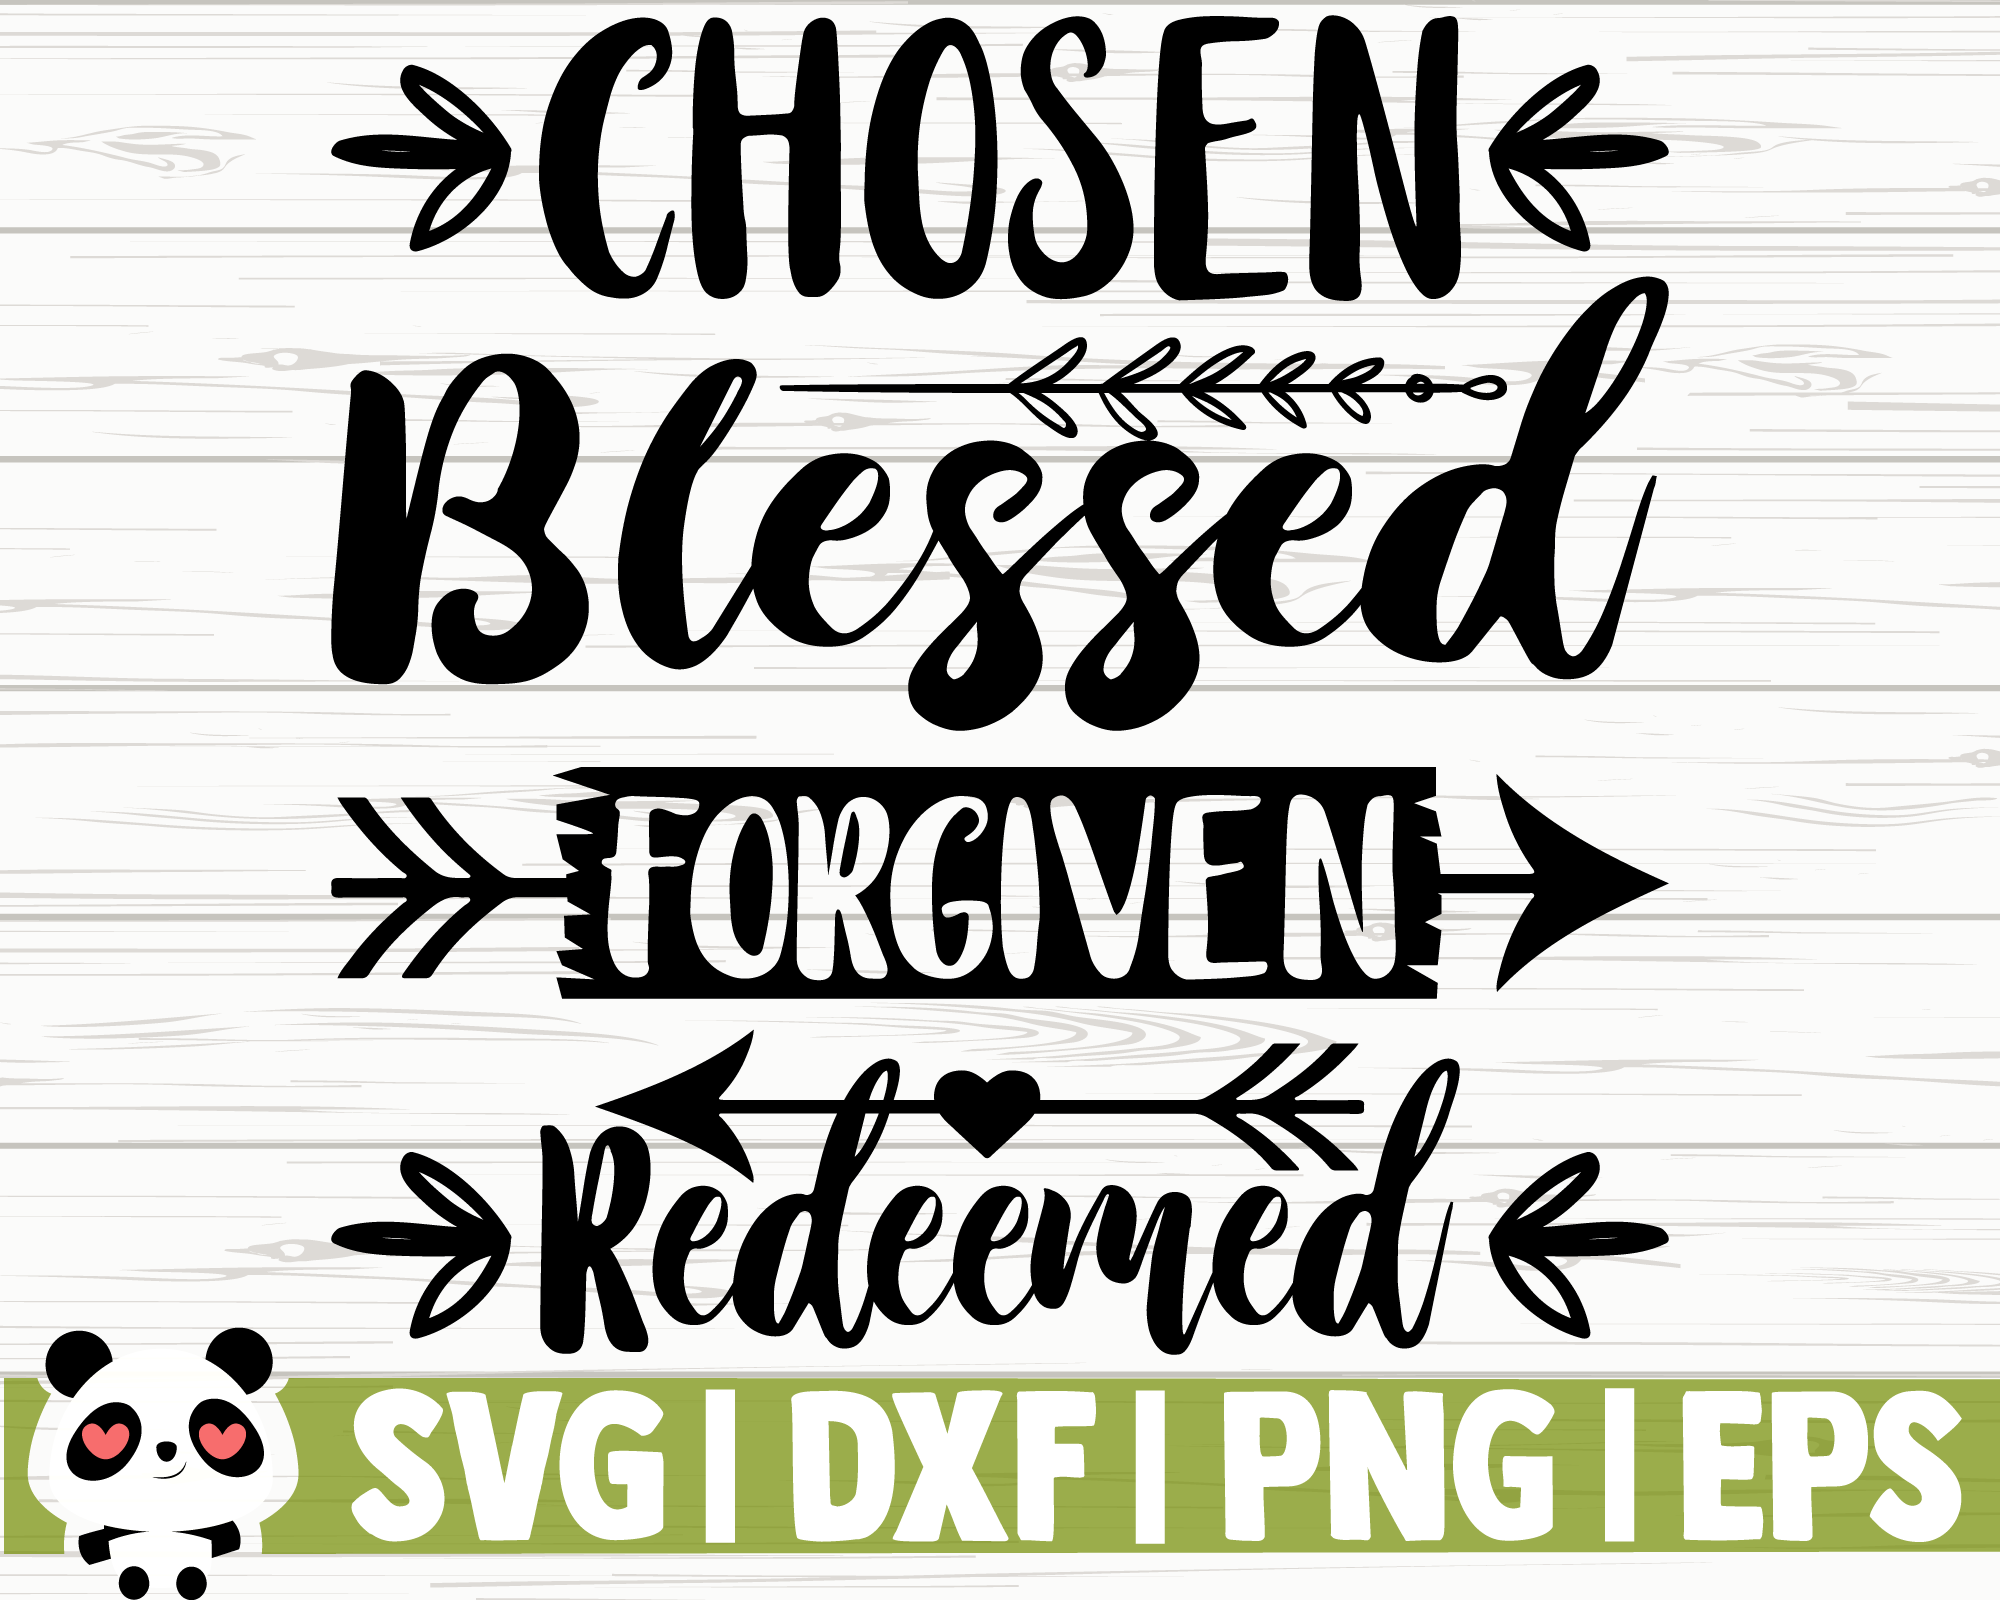 Chosen Blessed Forgiven Redeemed Cross Easter 50880 Waterslide or Sublimation Decal